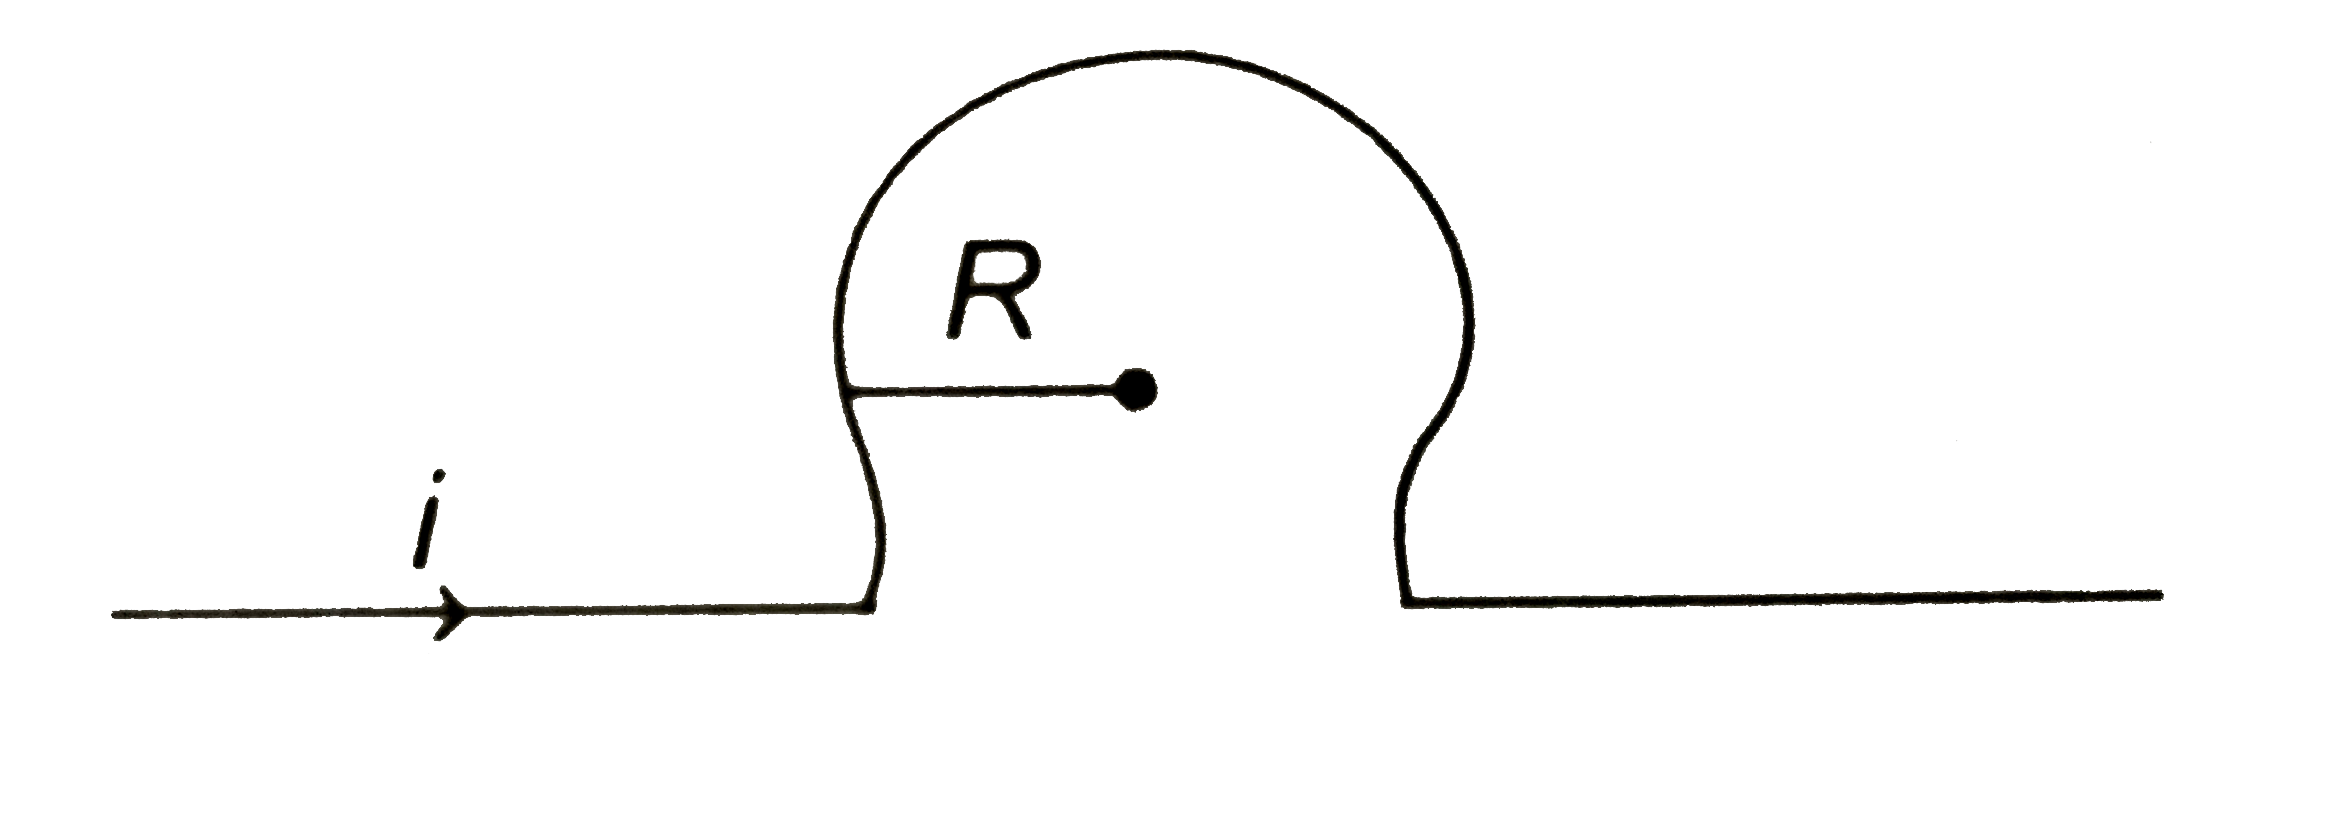 A long stratight conductor is bent into shape as shown. If it carries 1 A and its radius is R, then magnetic field B at the centre of circular coil